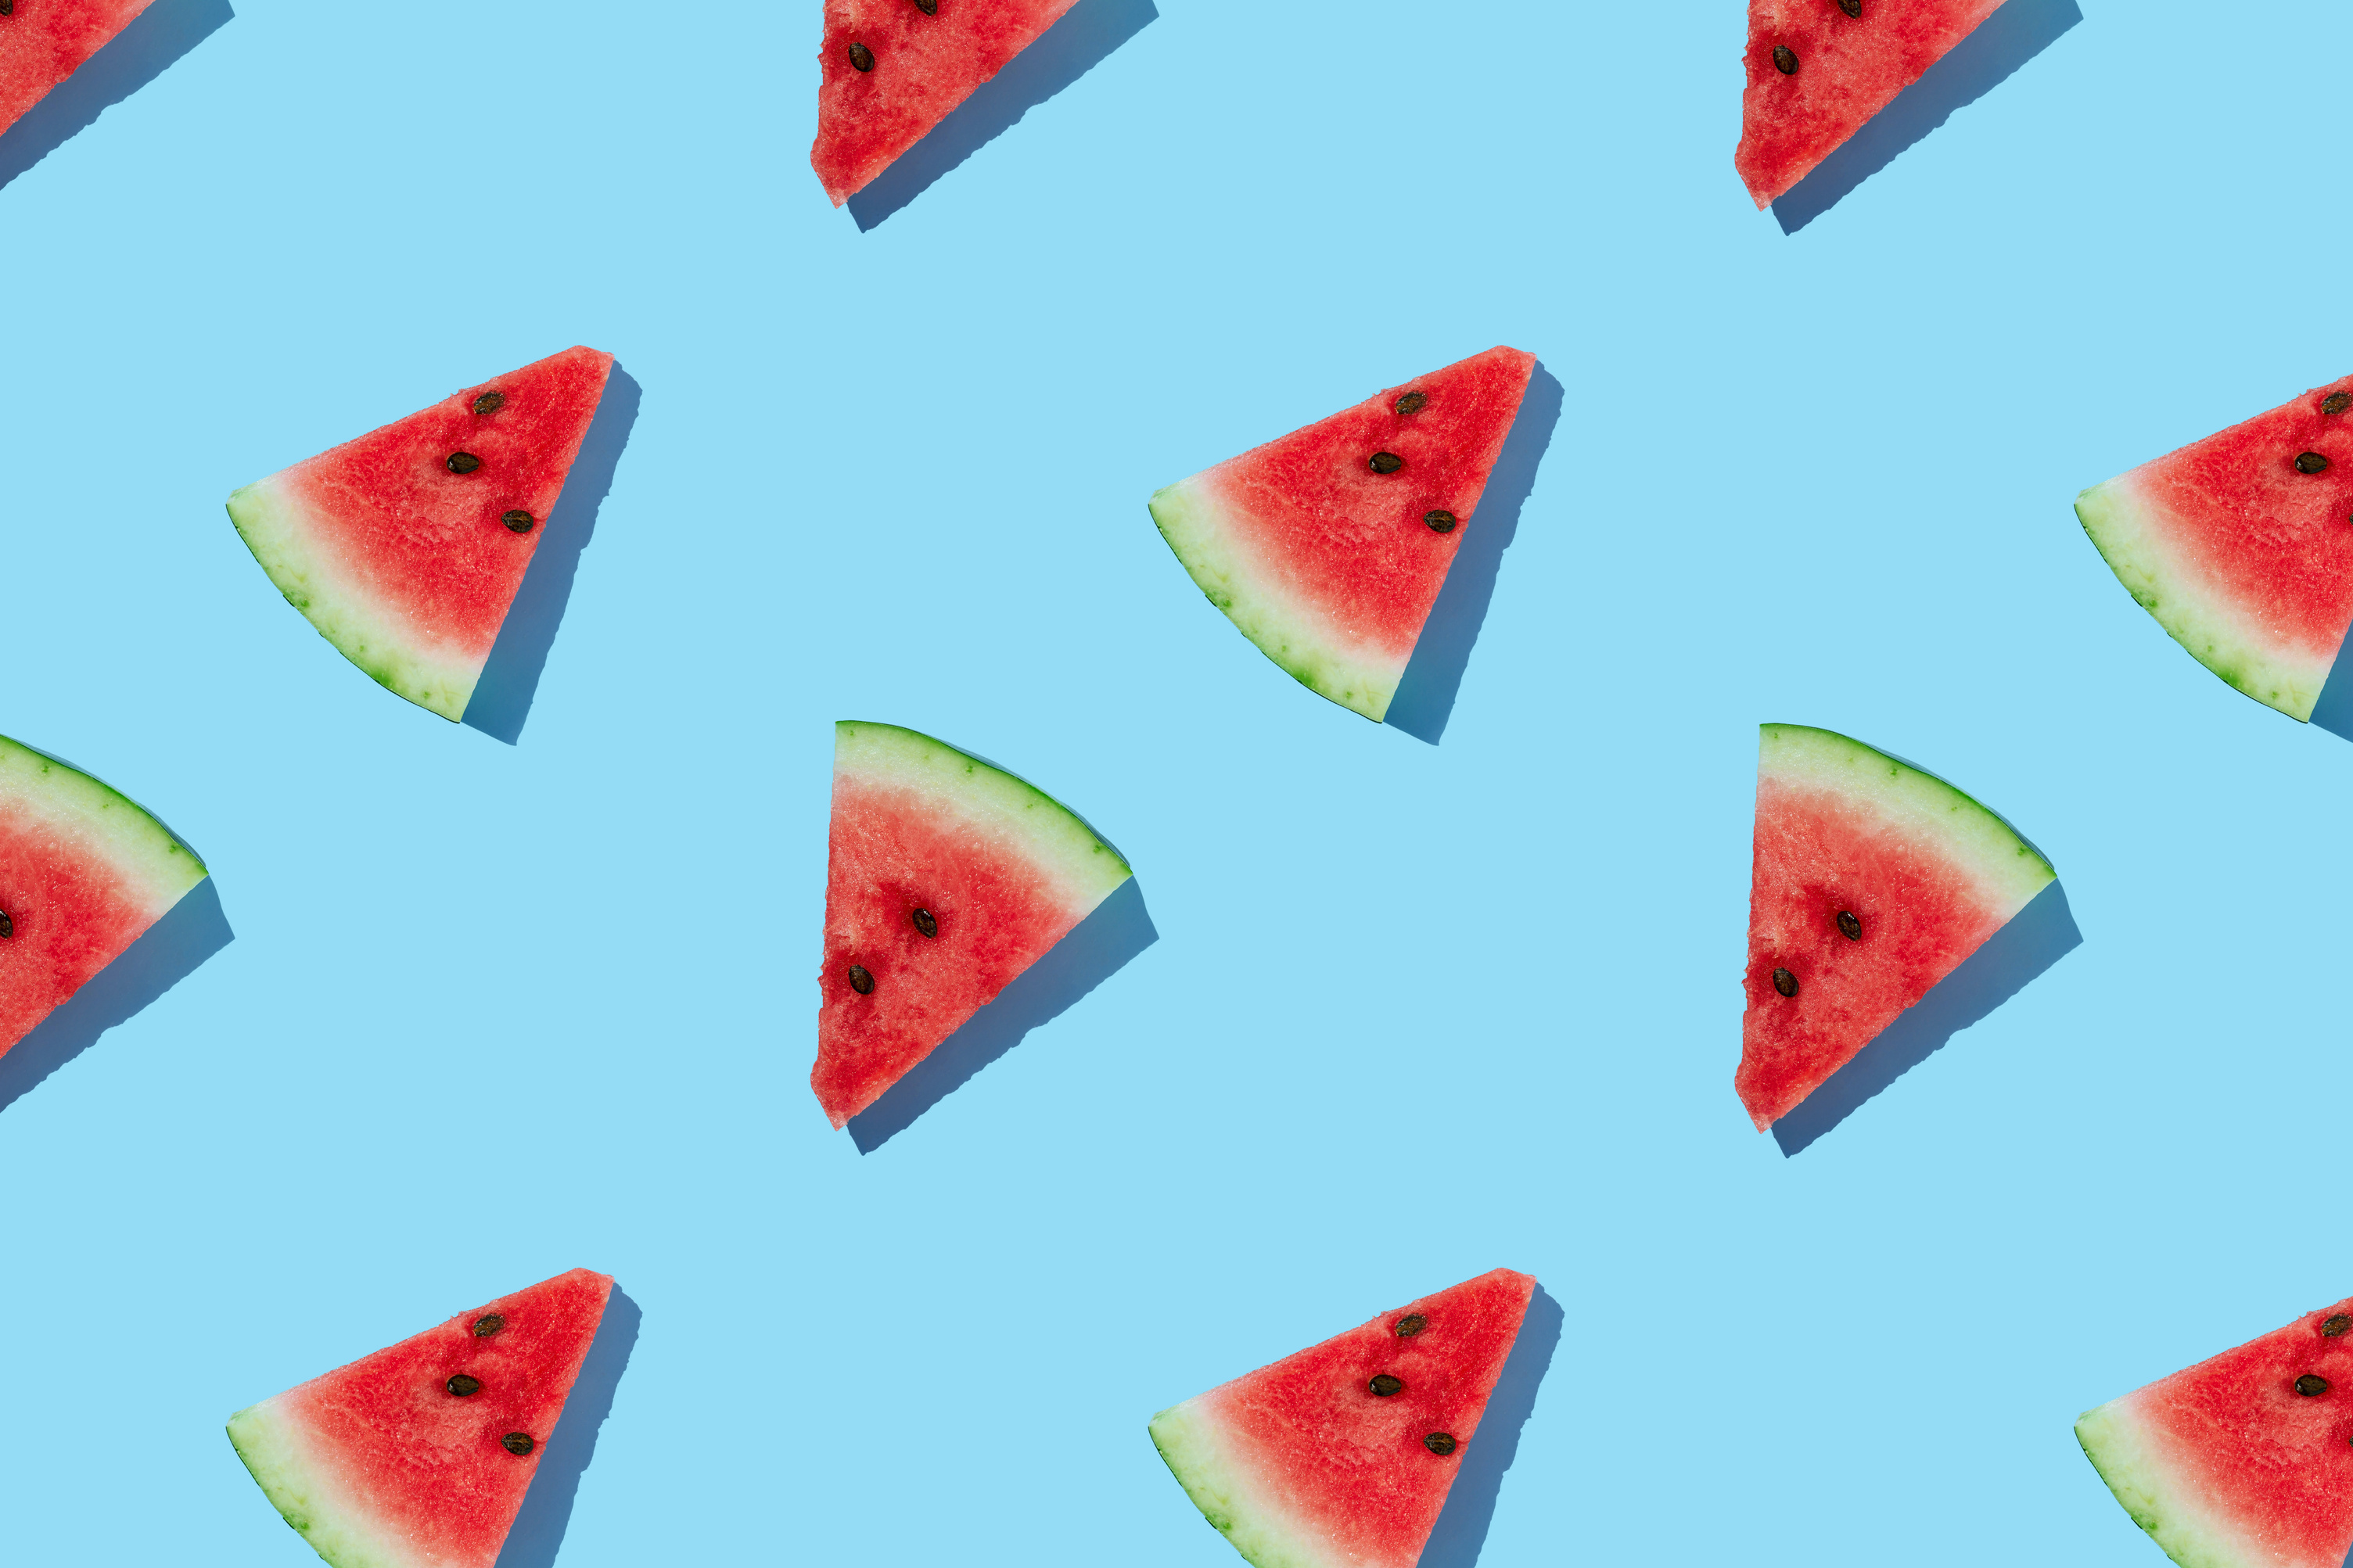 Watermelon pattern made of sliced watermelon on blue background.